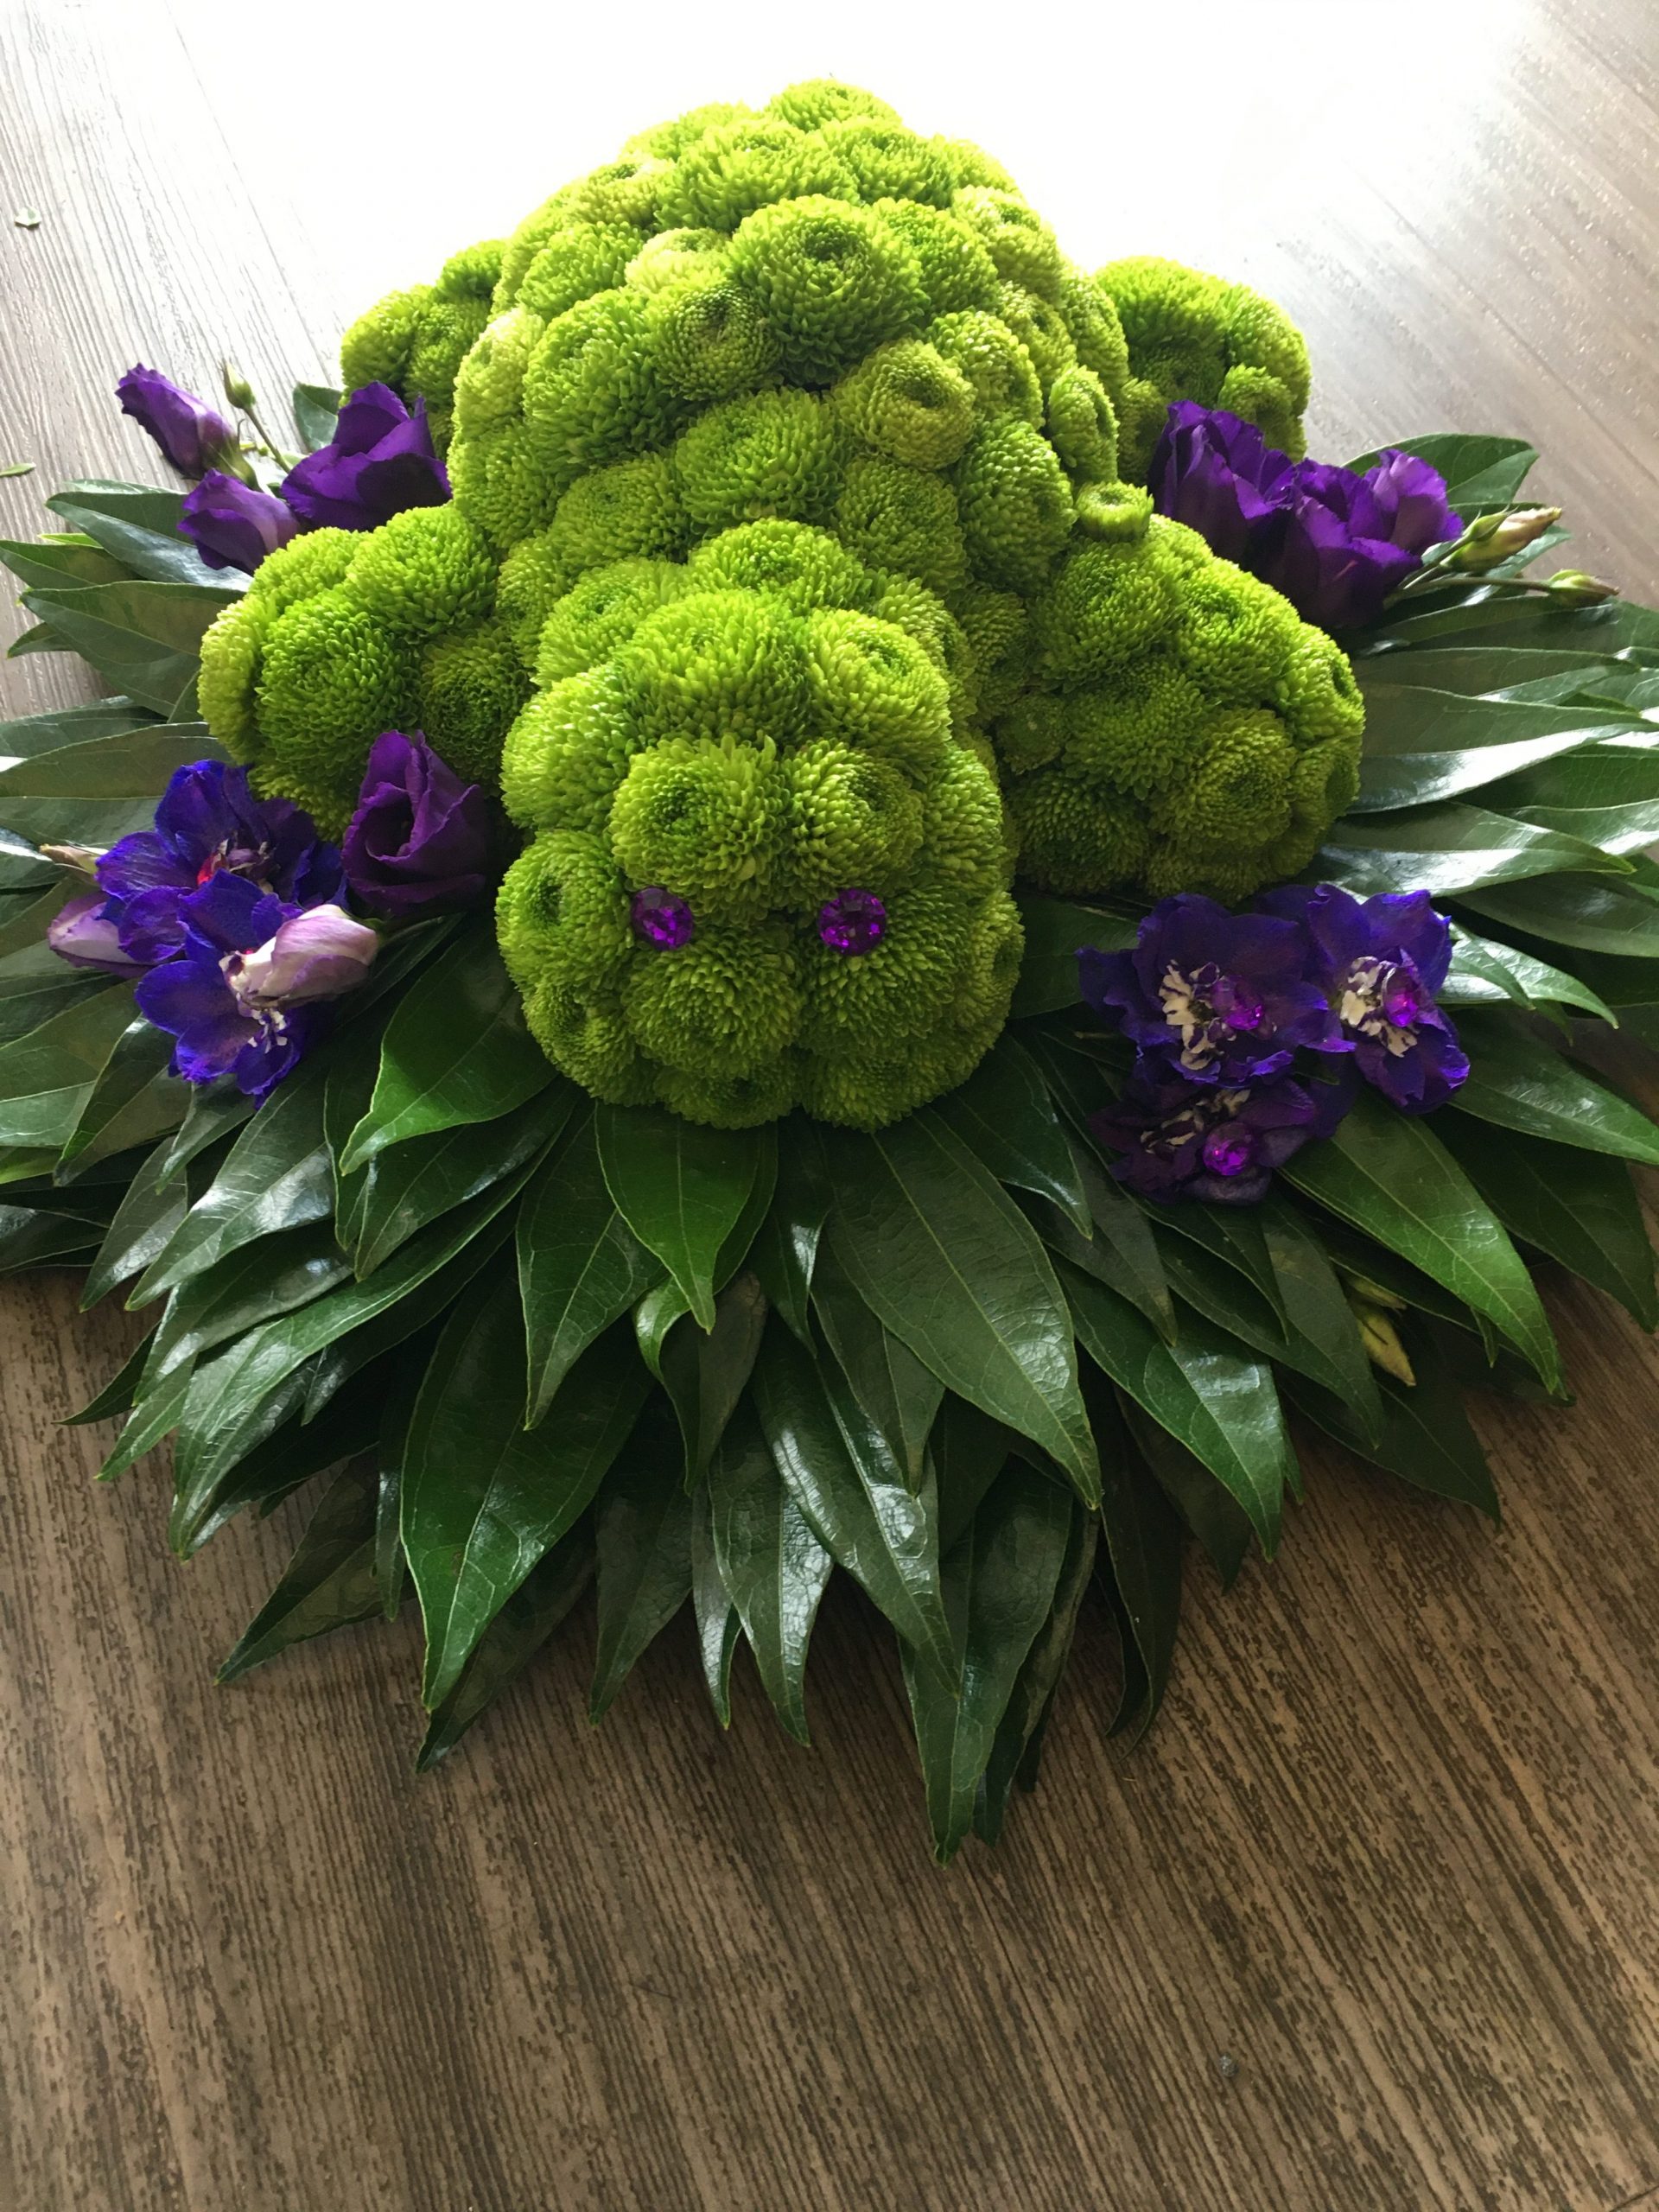 Bespoke funeral tribute of a Turtle